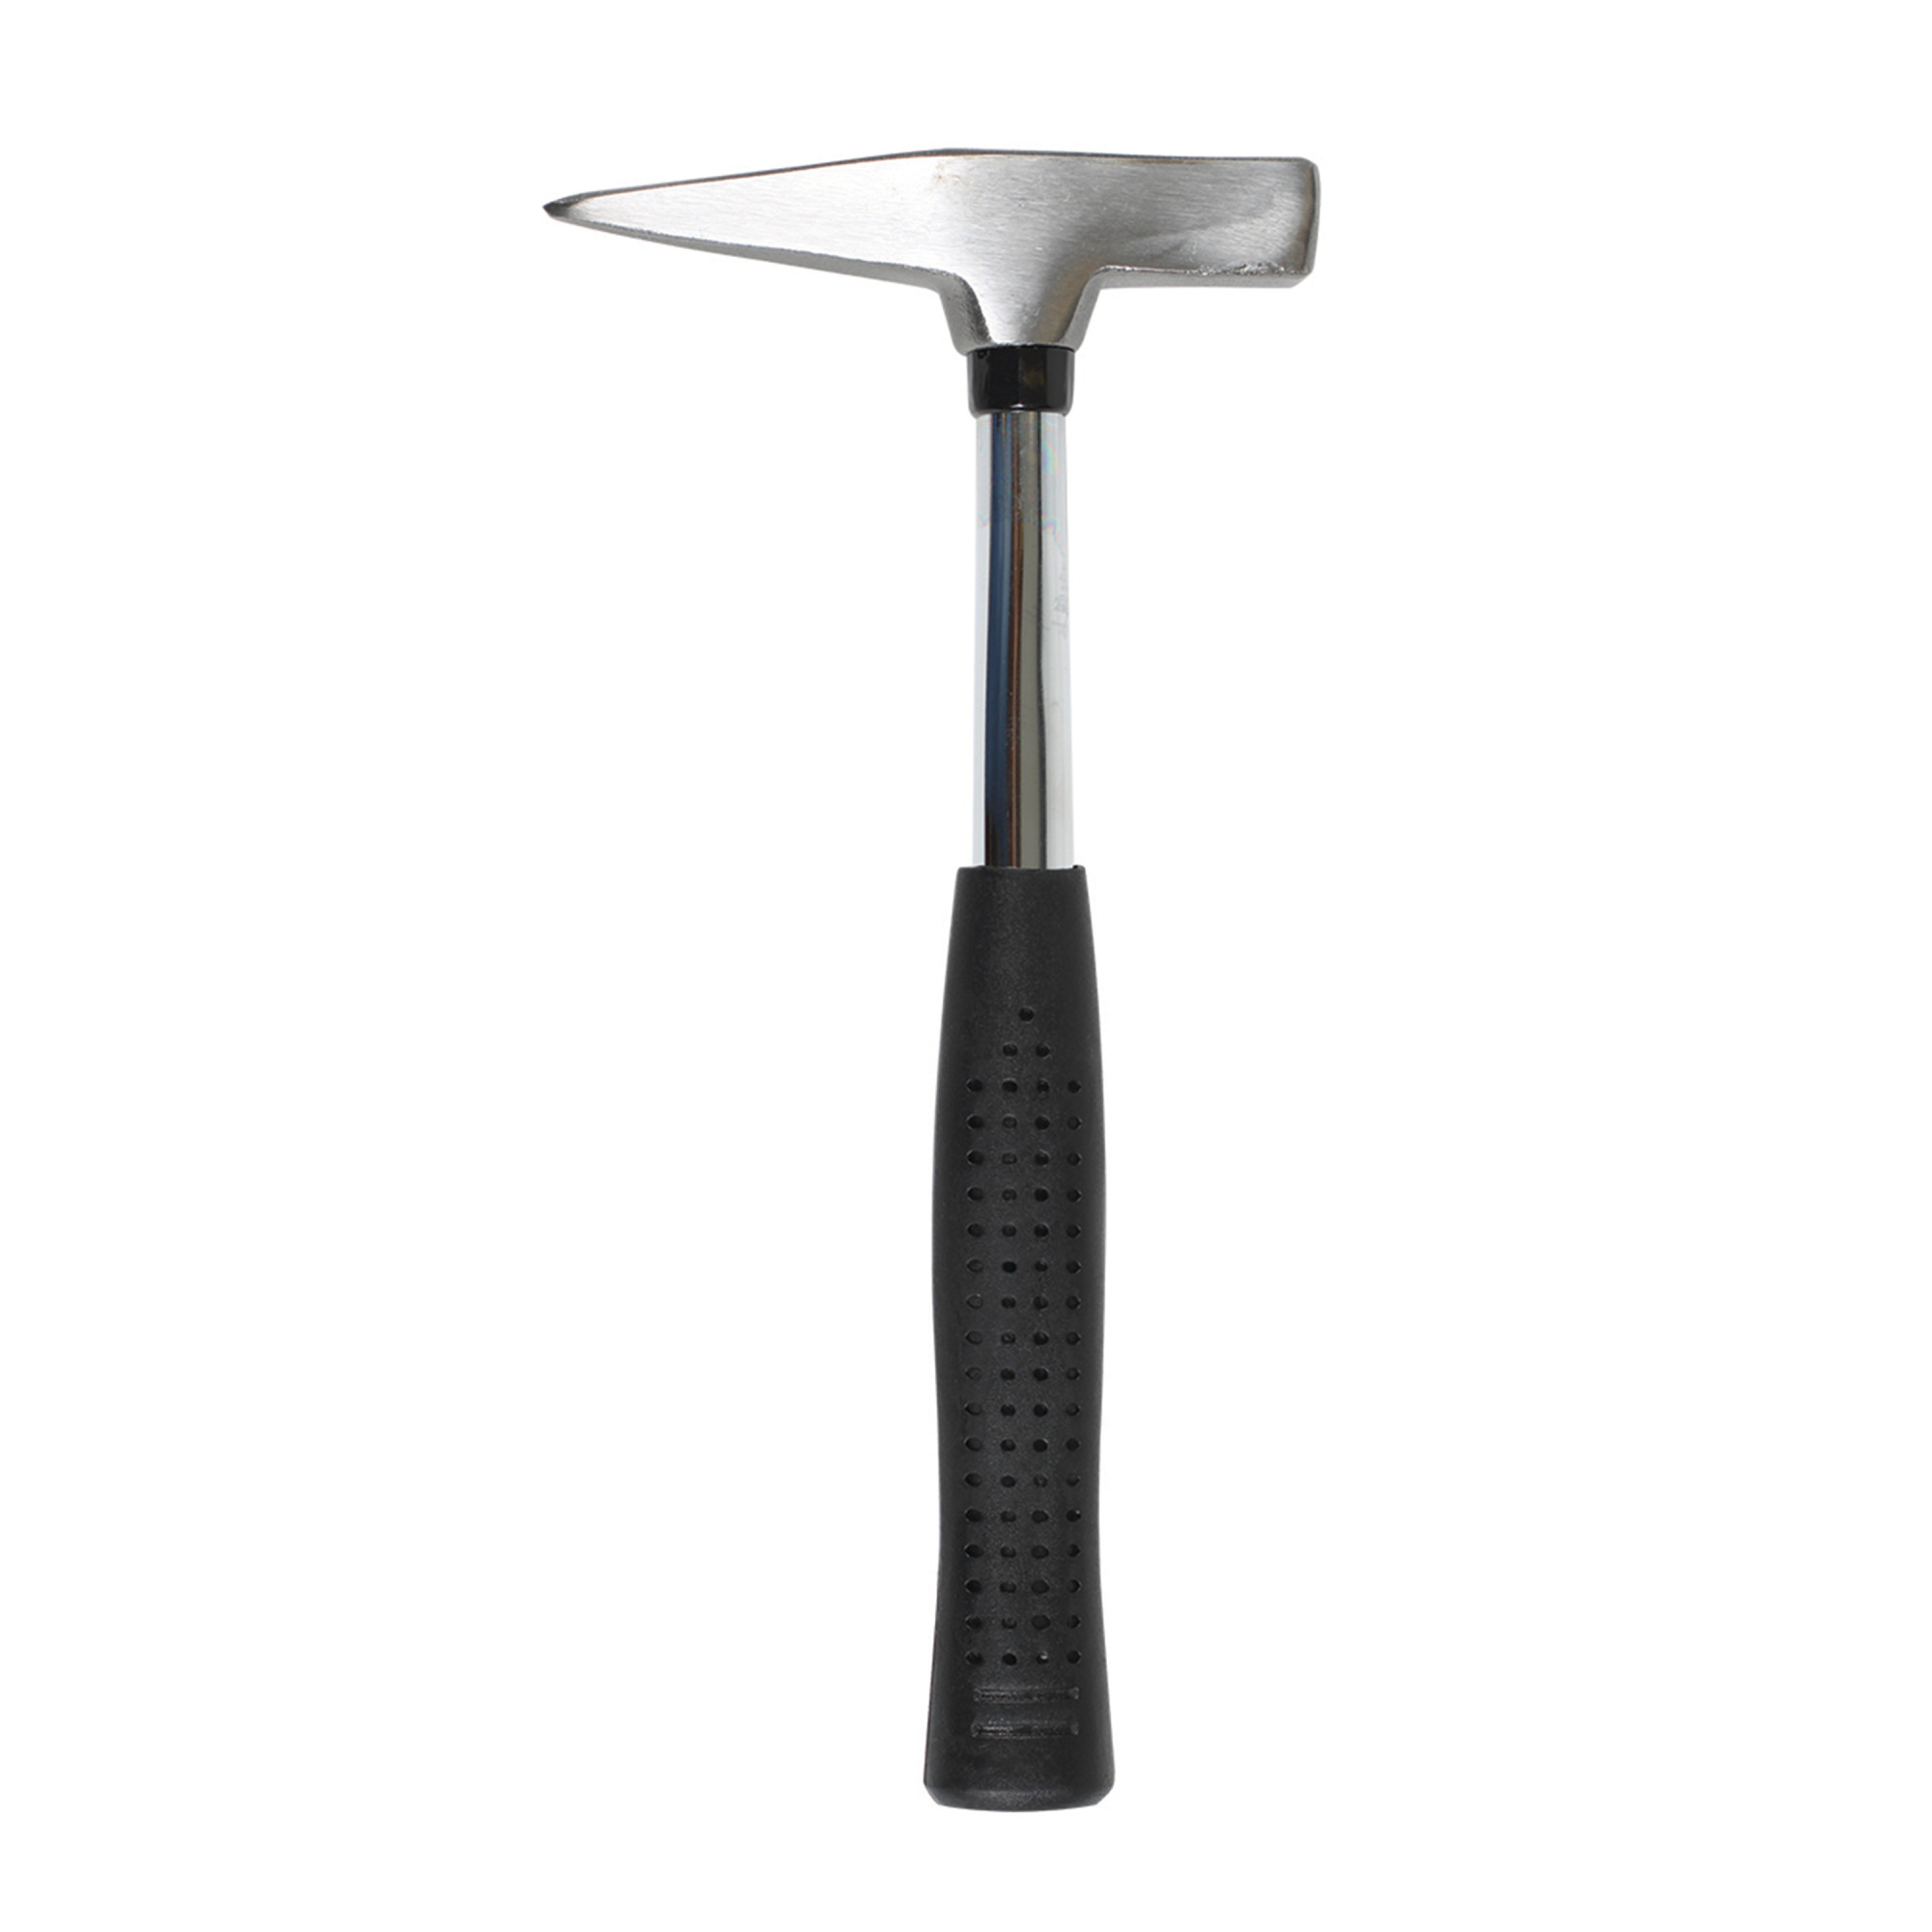 Stansport Prospector's Rock Pick Hammer Camping Mining Outdoors (New) - image 1 of 2